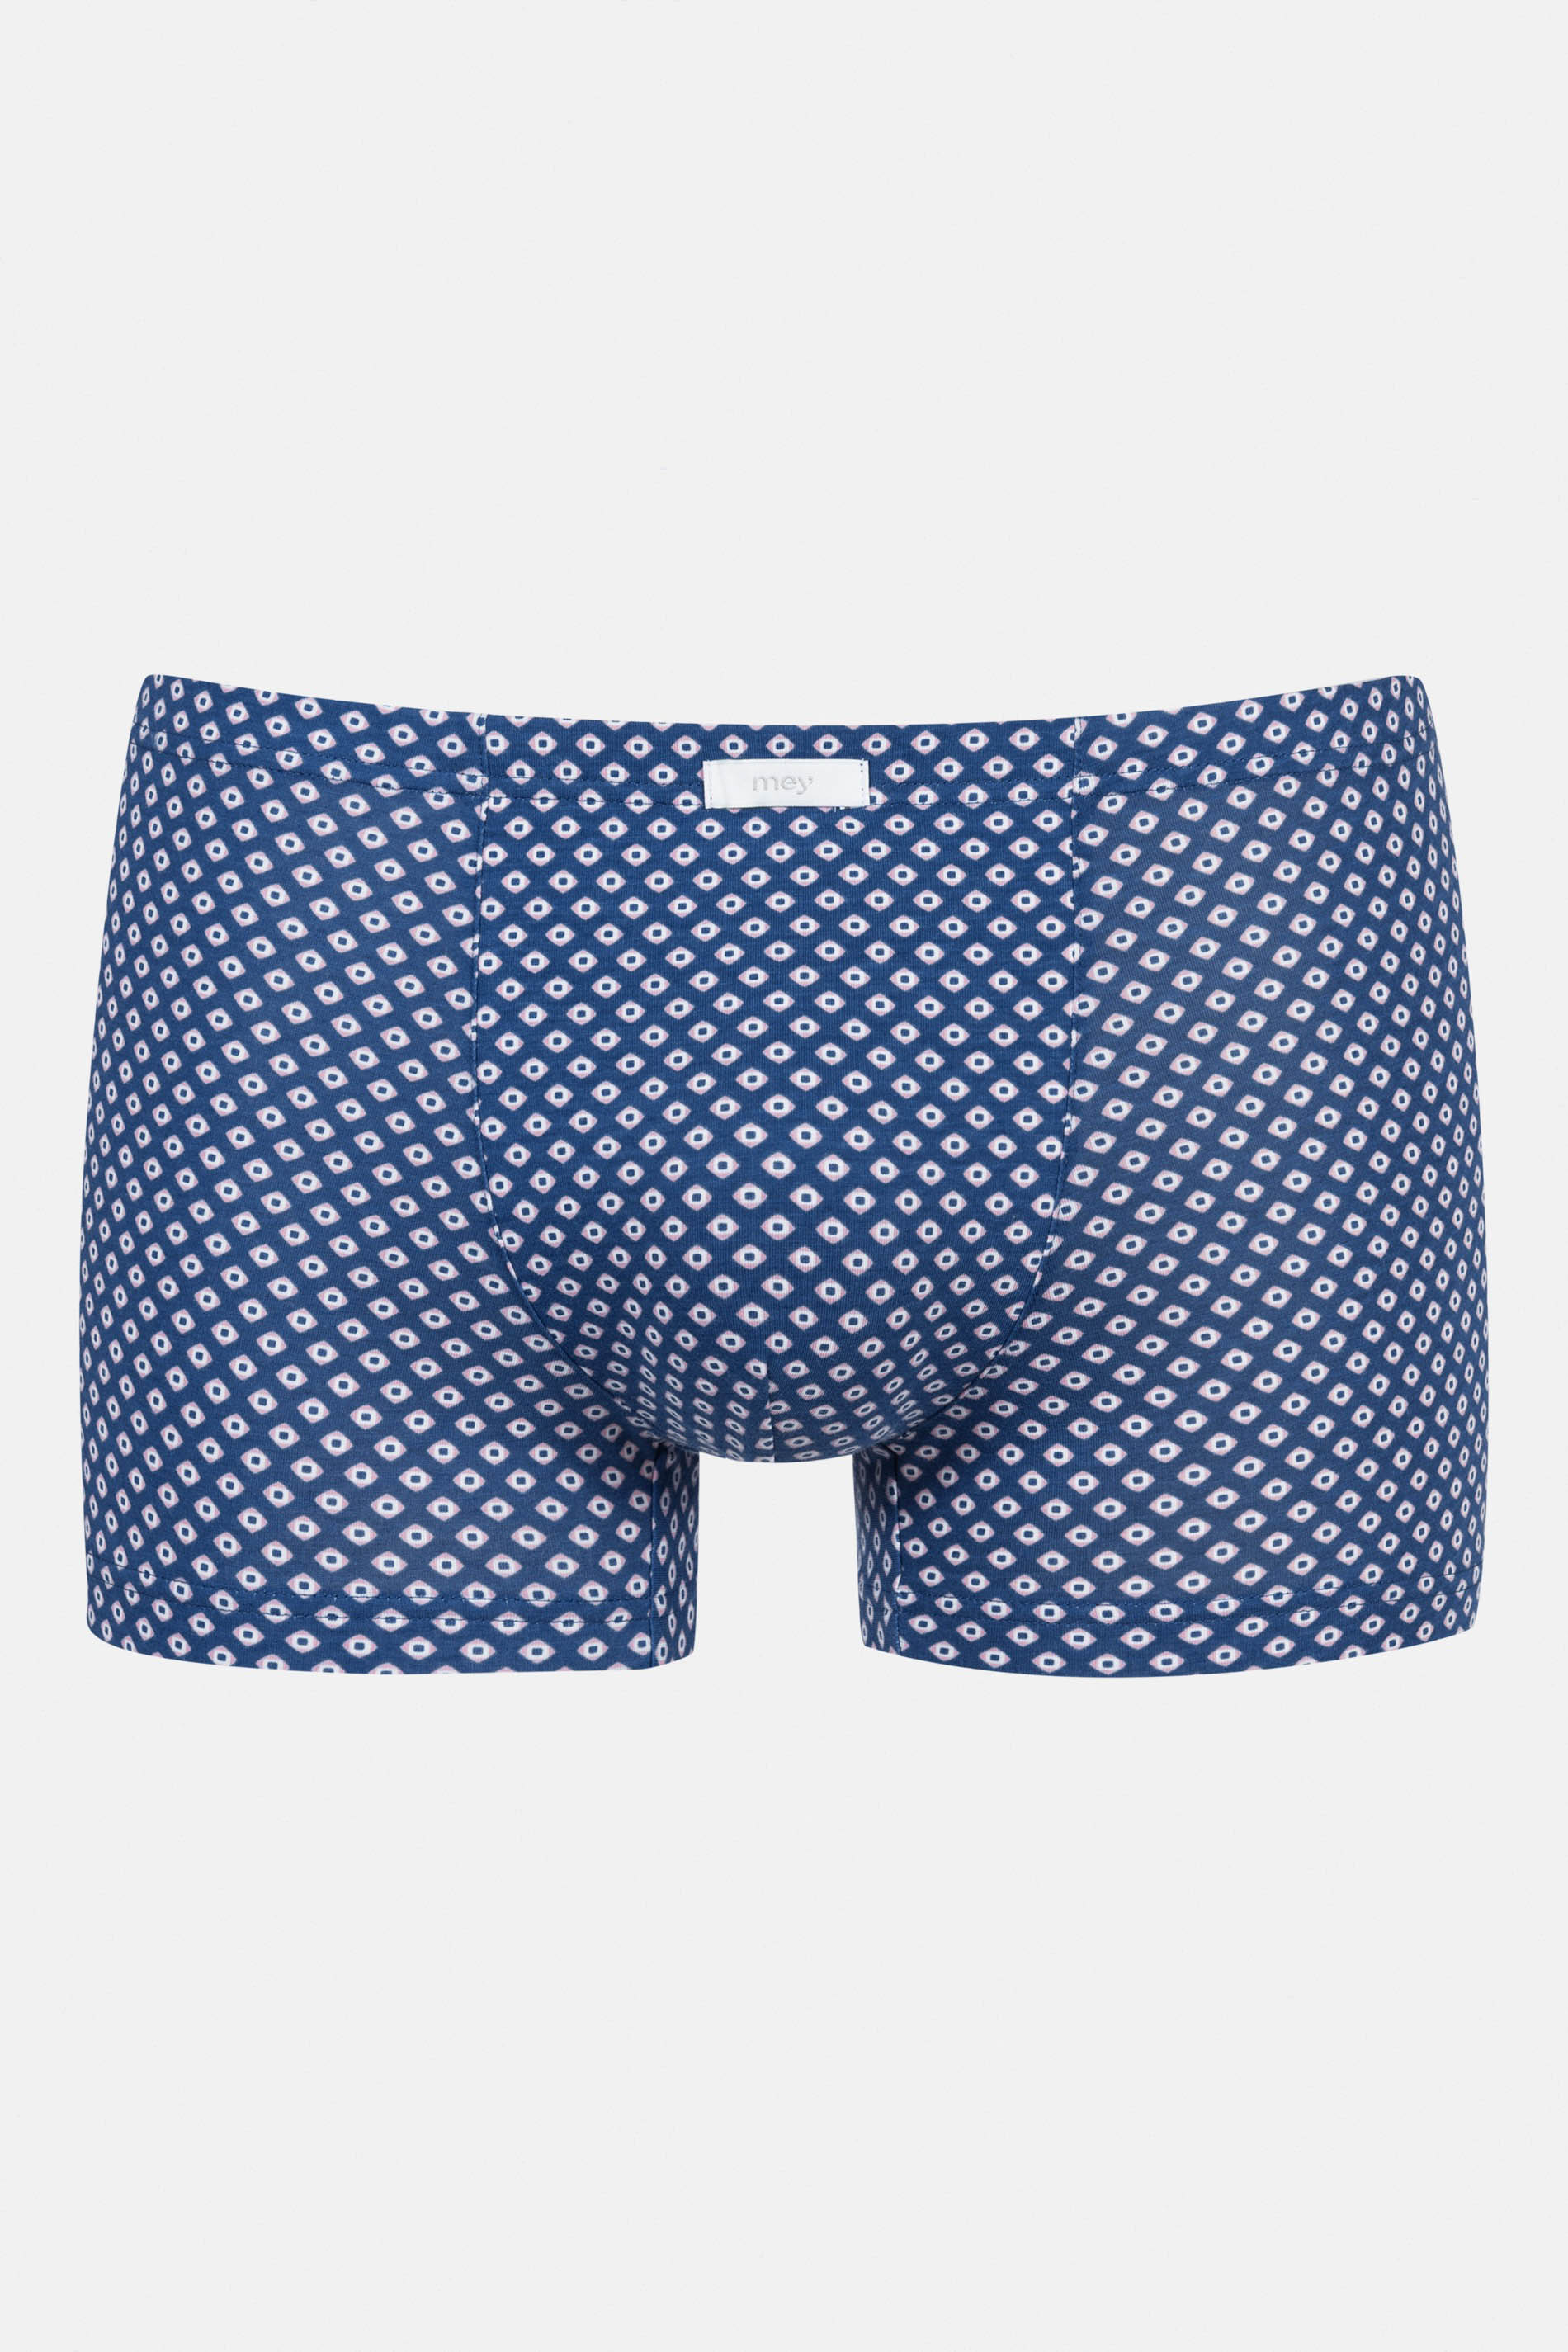 Shorty Serie Tie Print Uitknippen | mey®